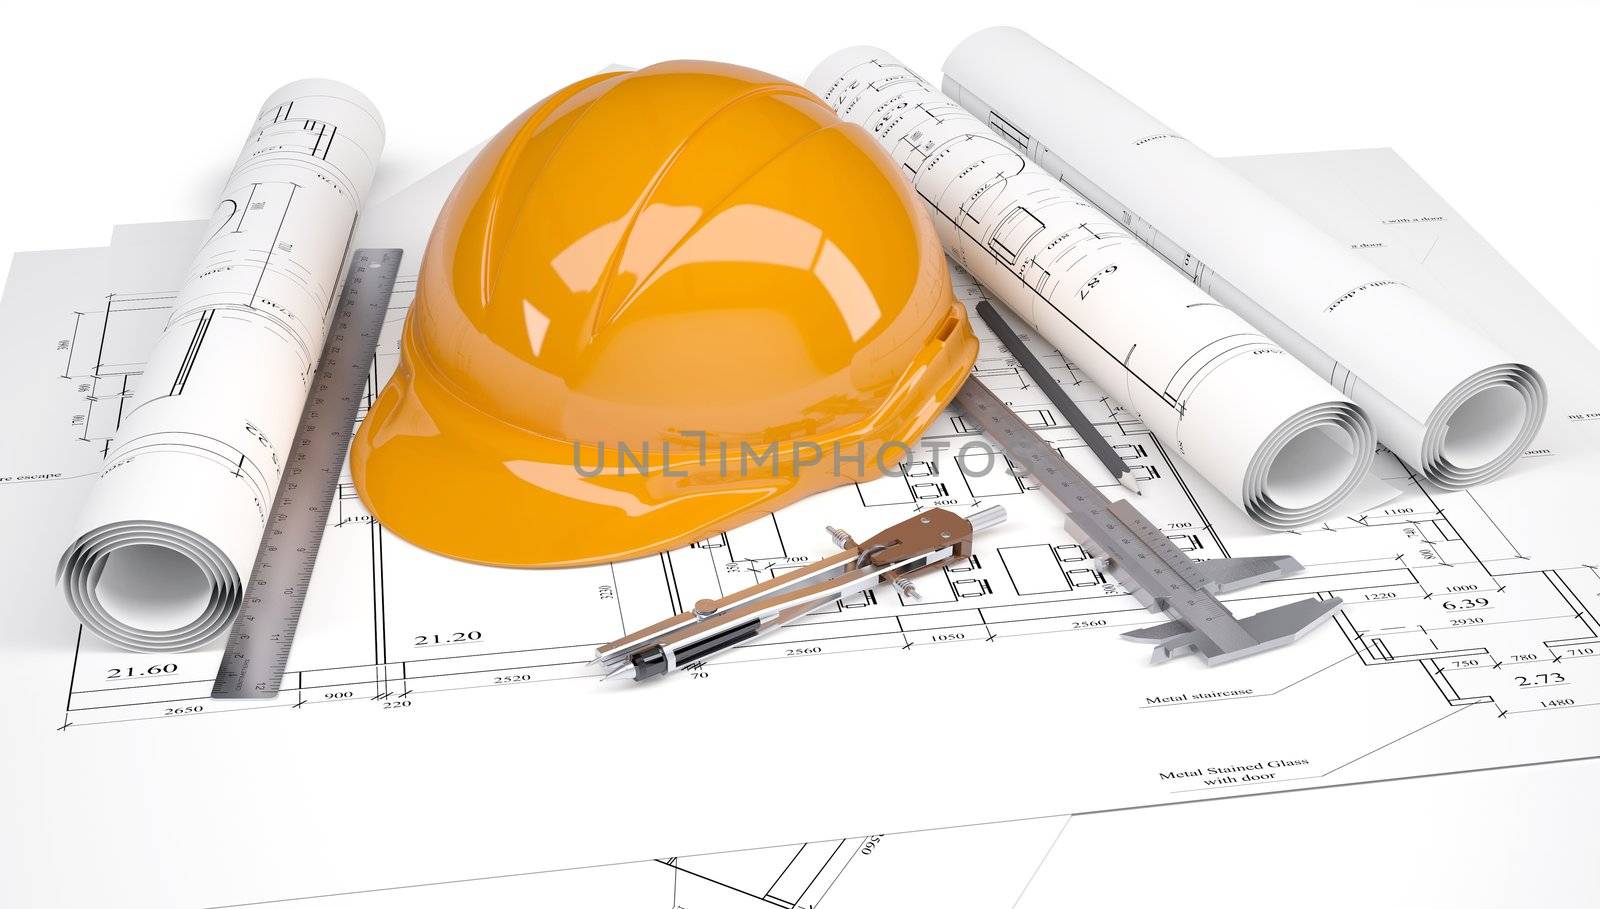 Orange construction helmet on the architectural drawings with engineering tools